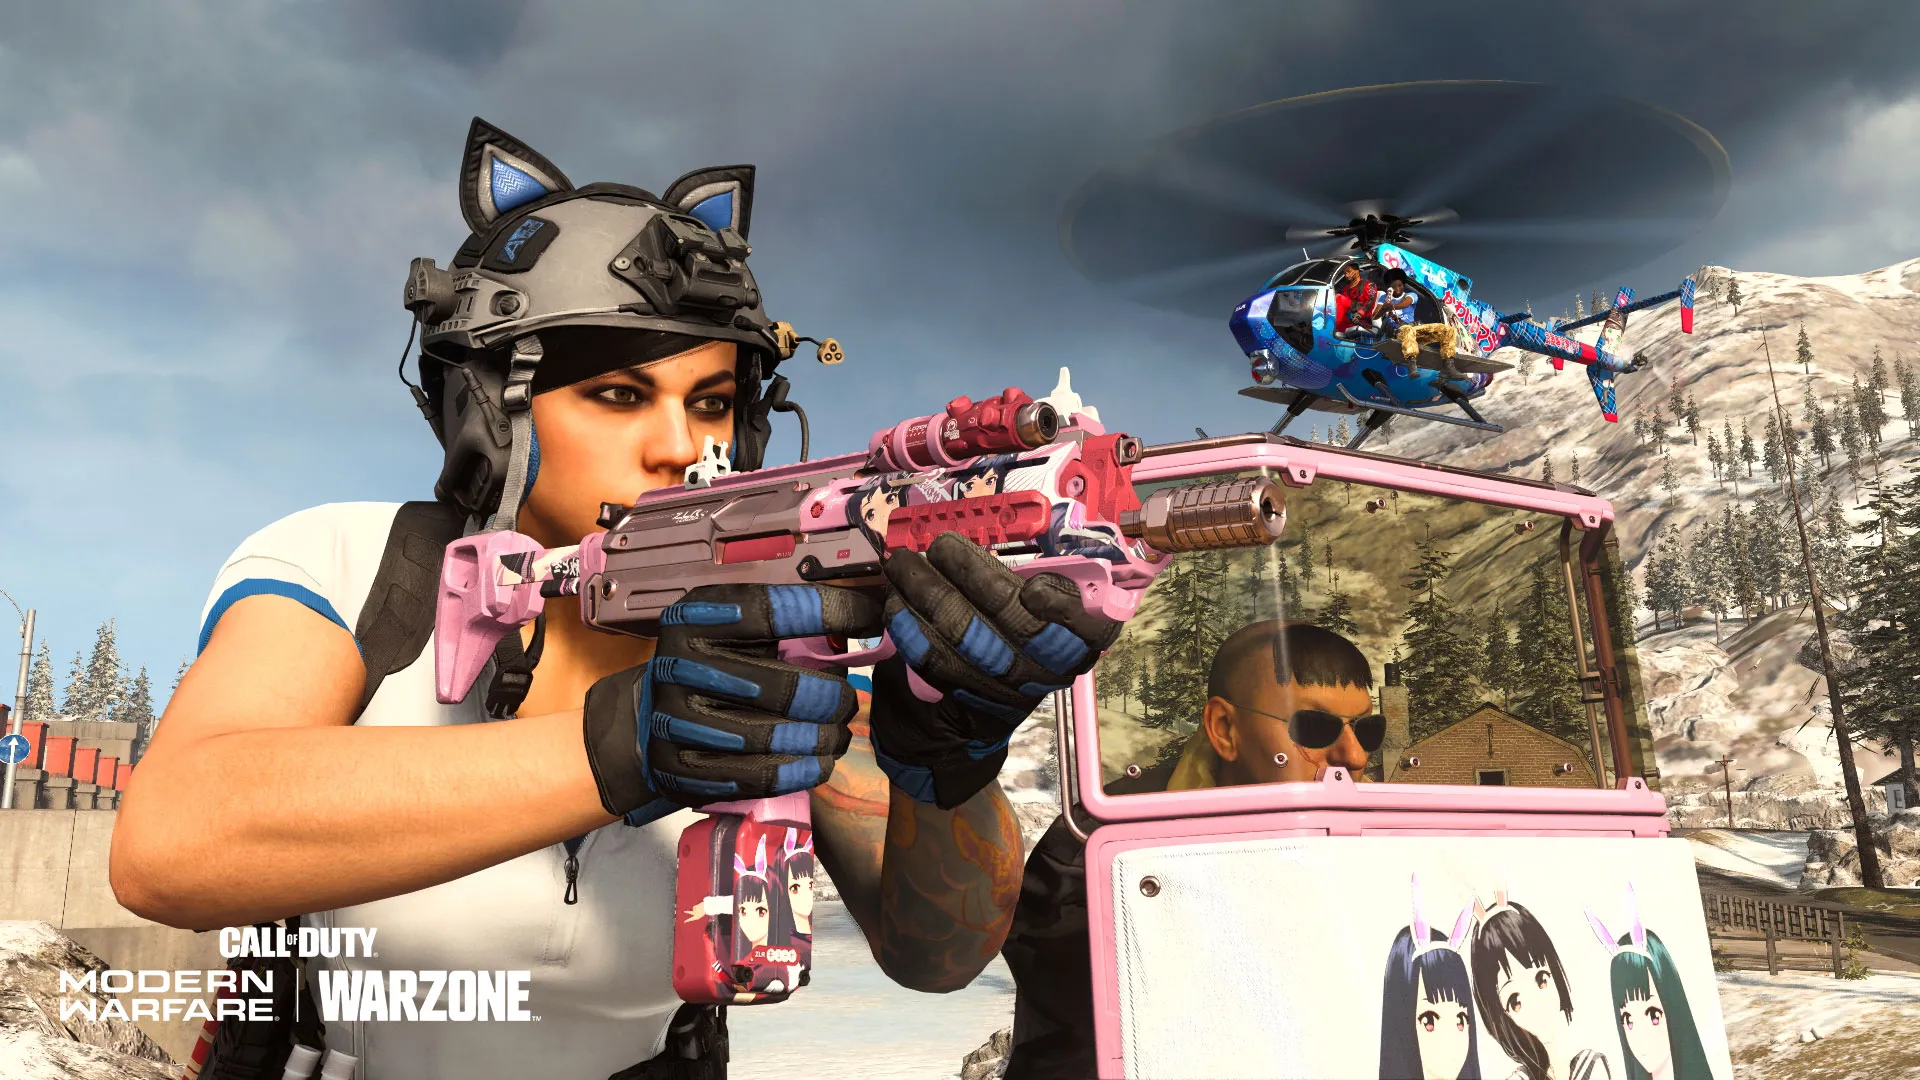 Projekt Melody Inspired Call of Duty Weapon Skin Draws Controversy from  Vtuber Herself - GamerBraves